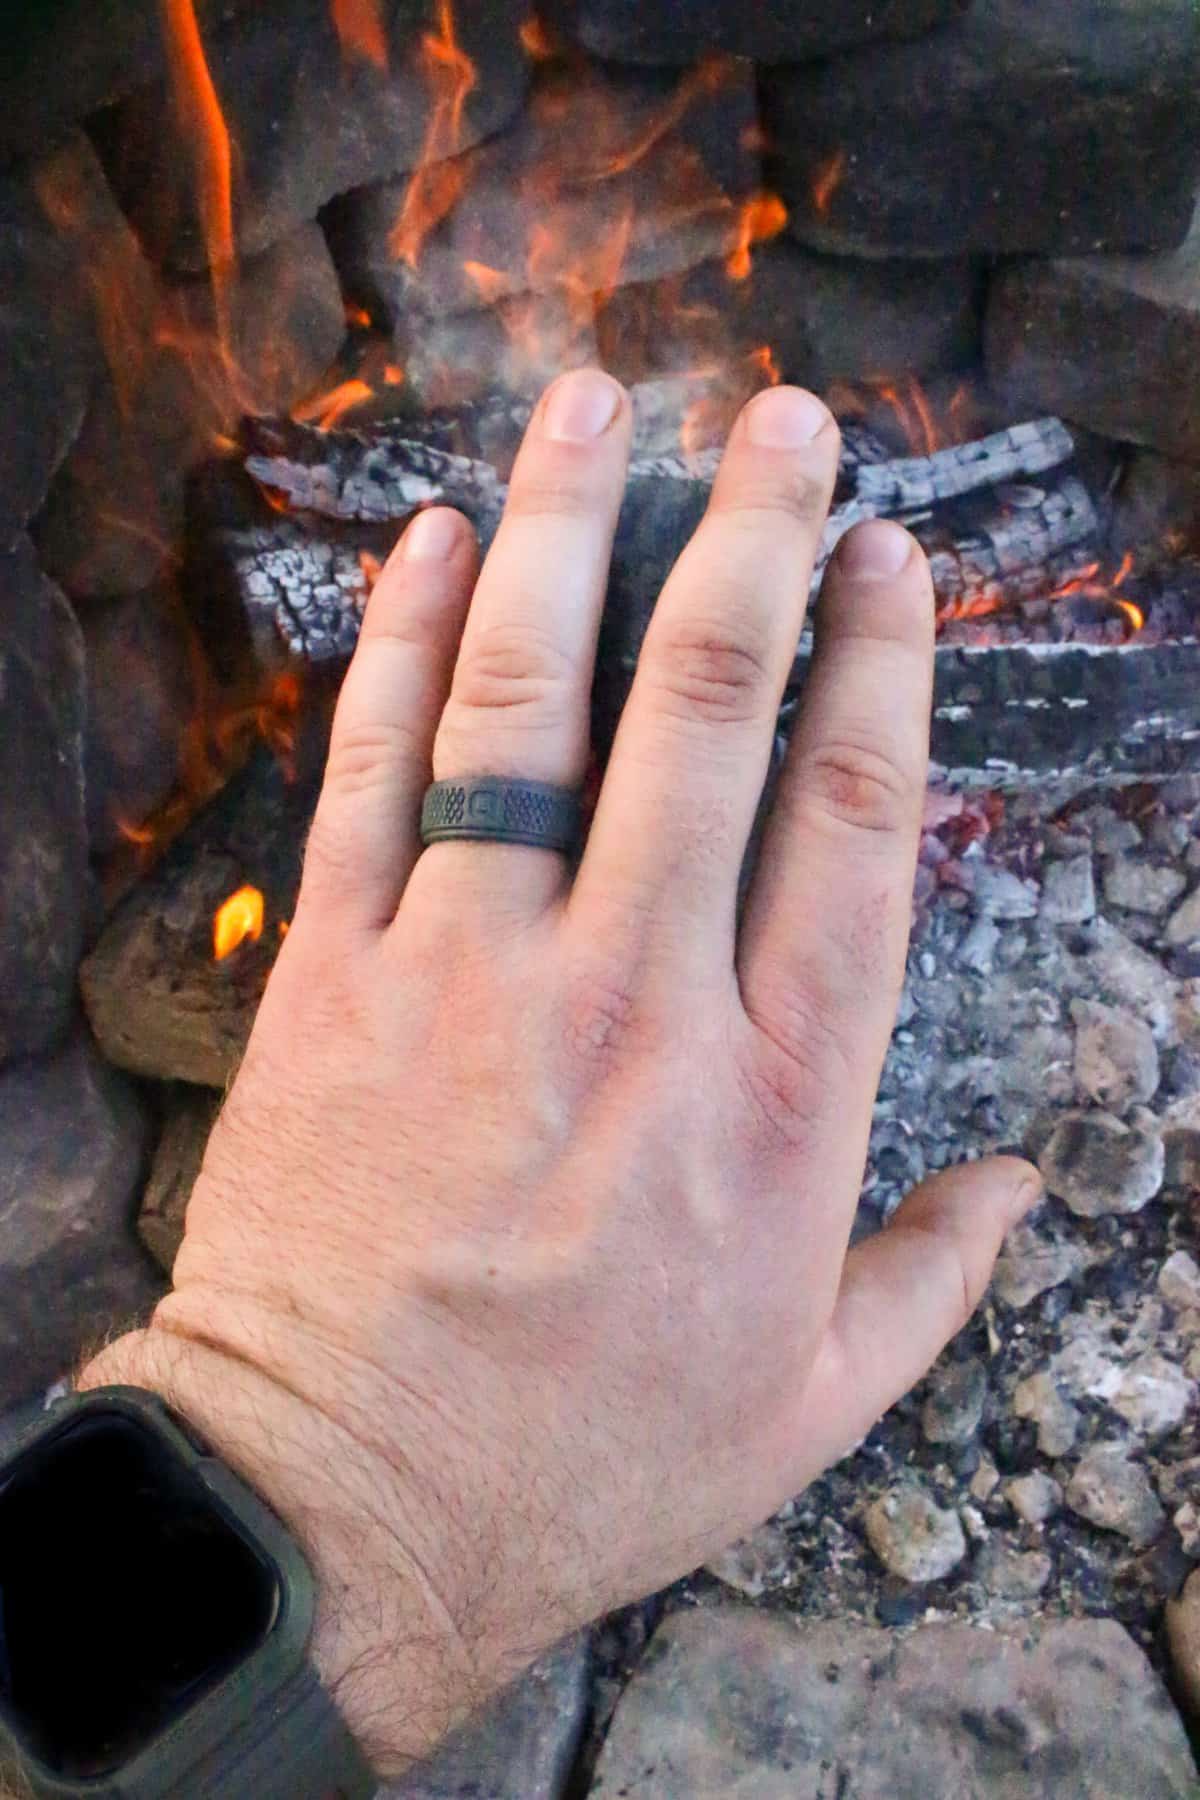 Showing the QALO ring with fire in the background.